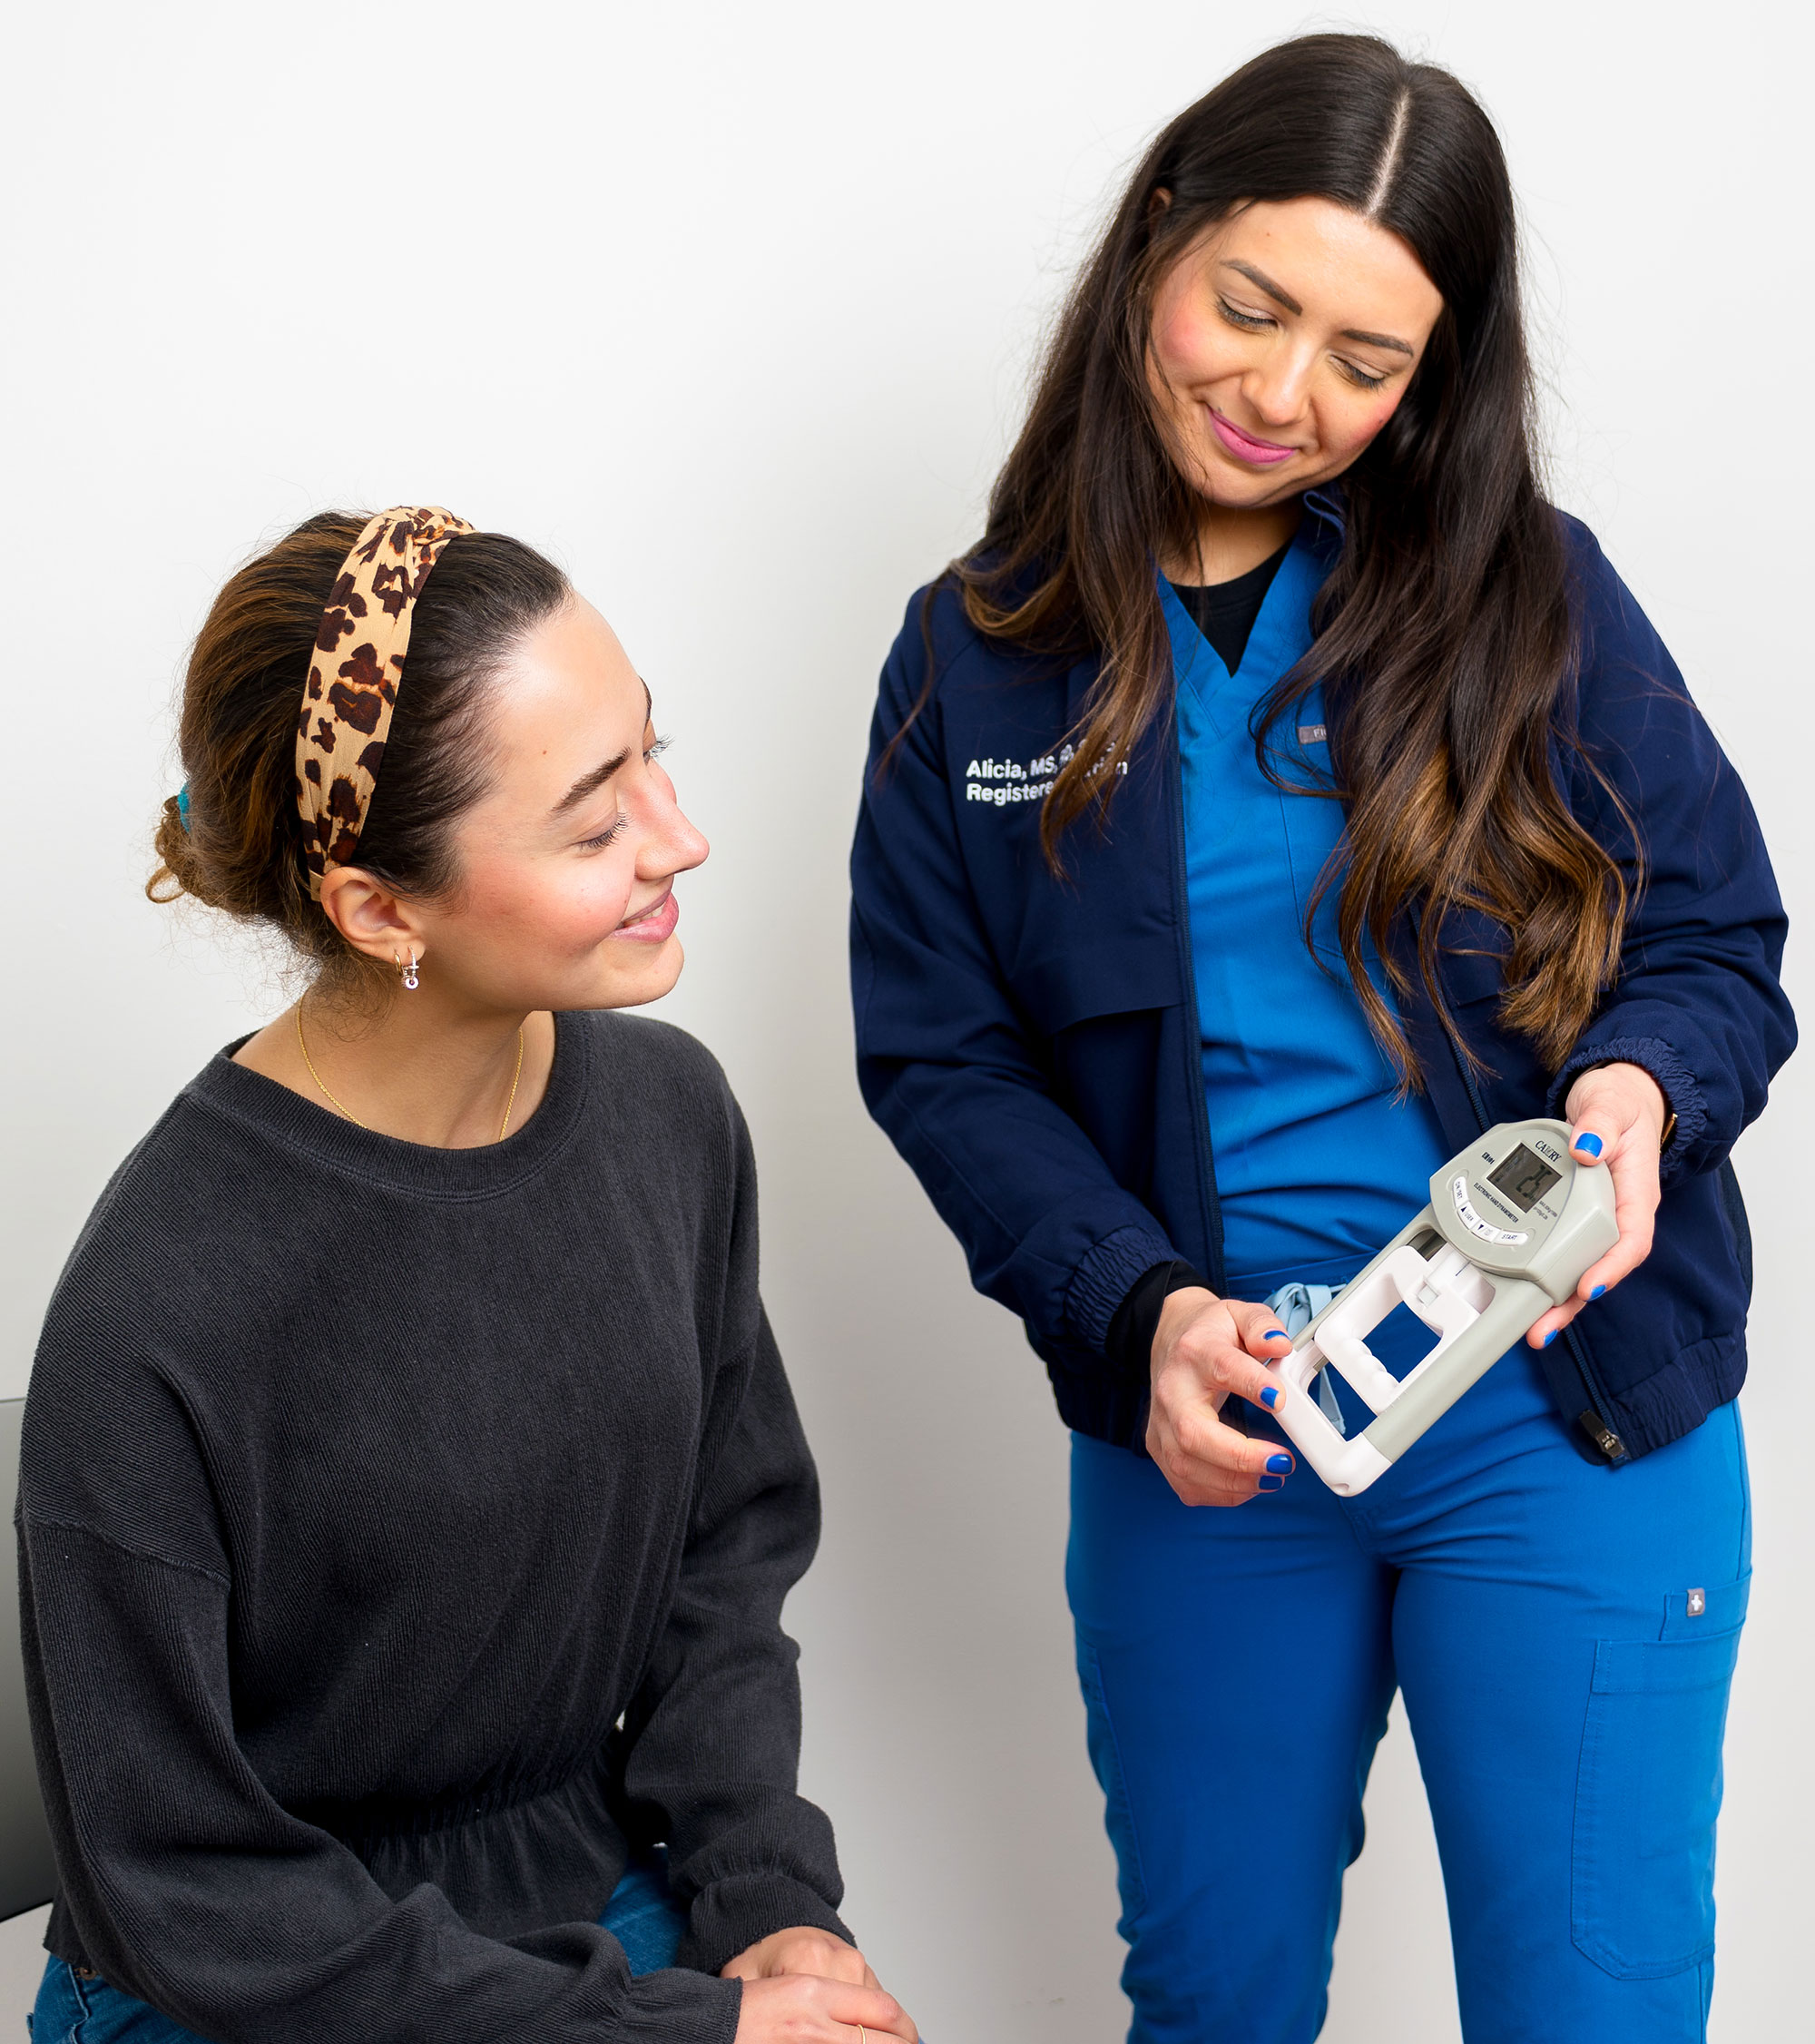 A woman in nursing scrubs showing another woman a dietetics tool